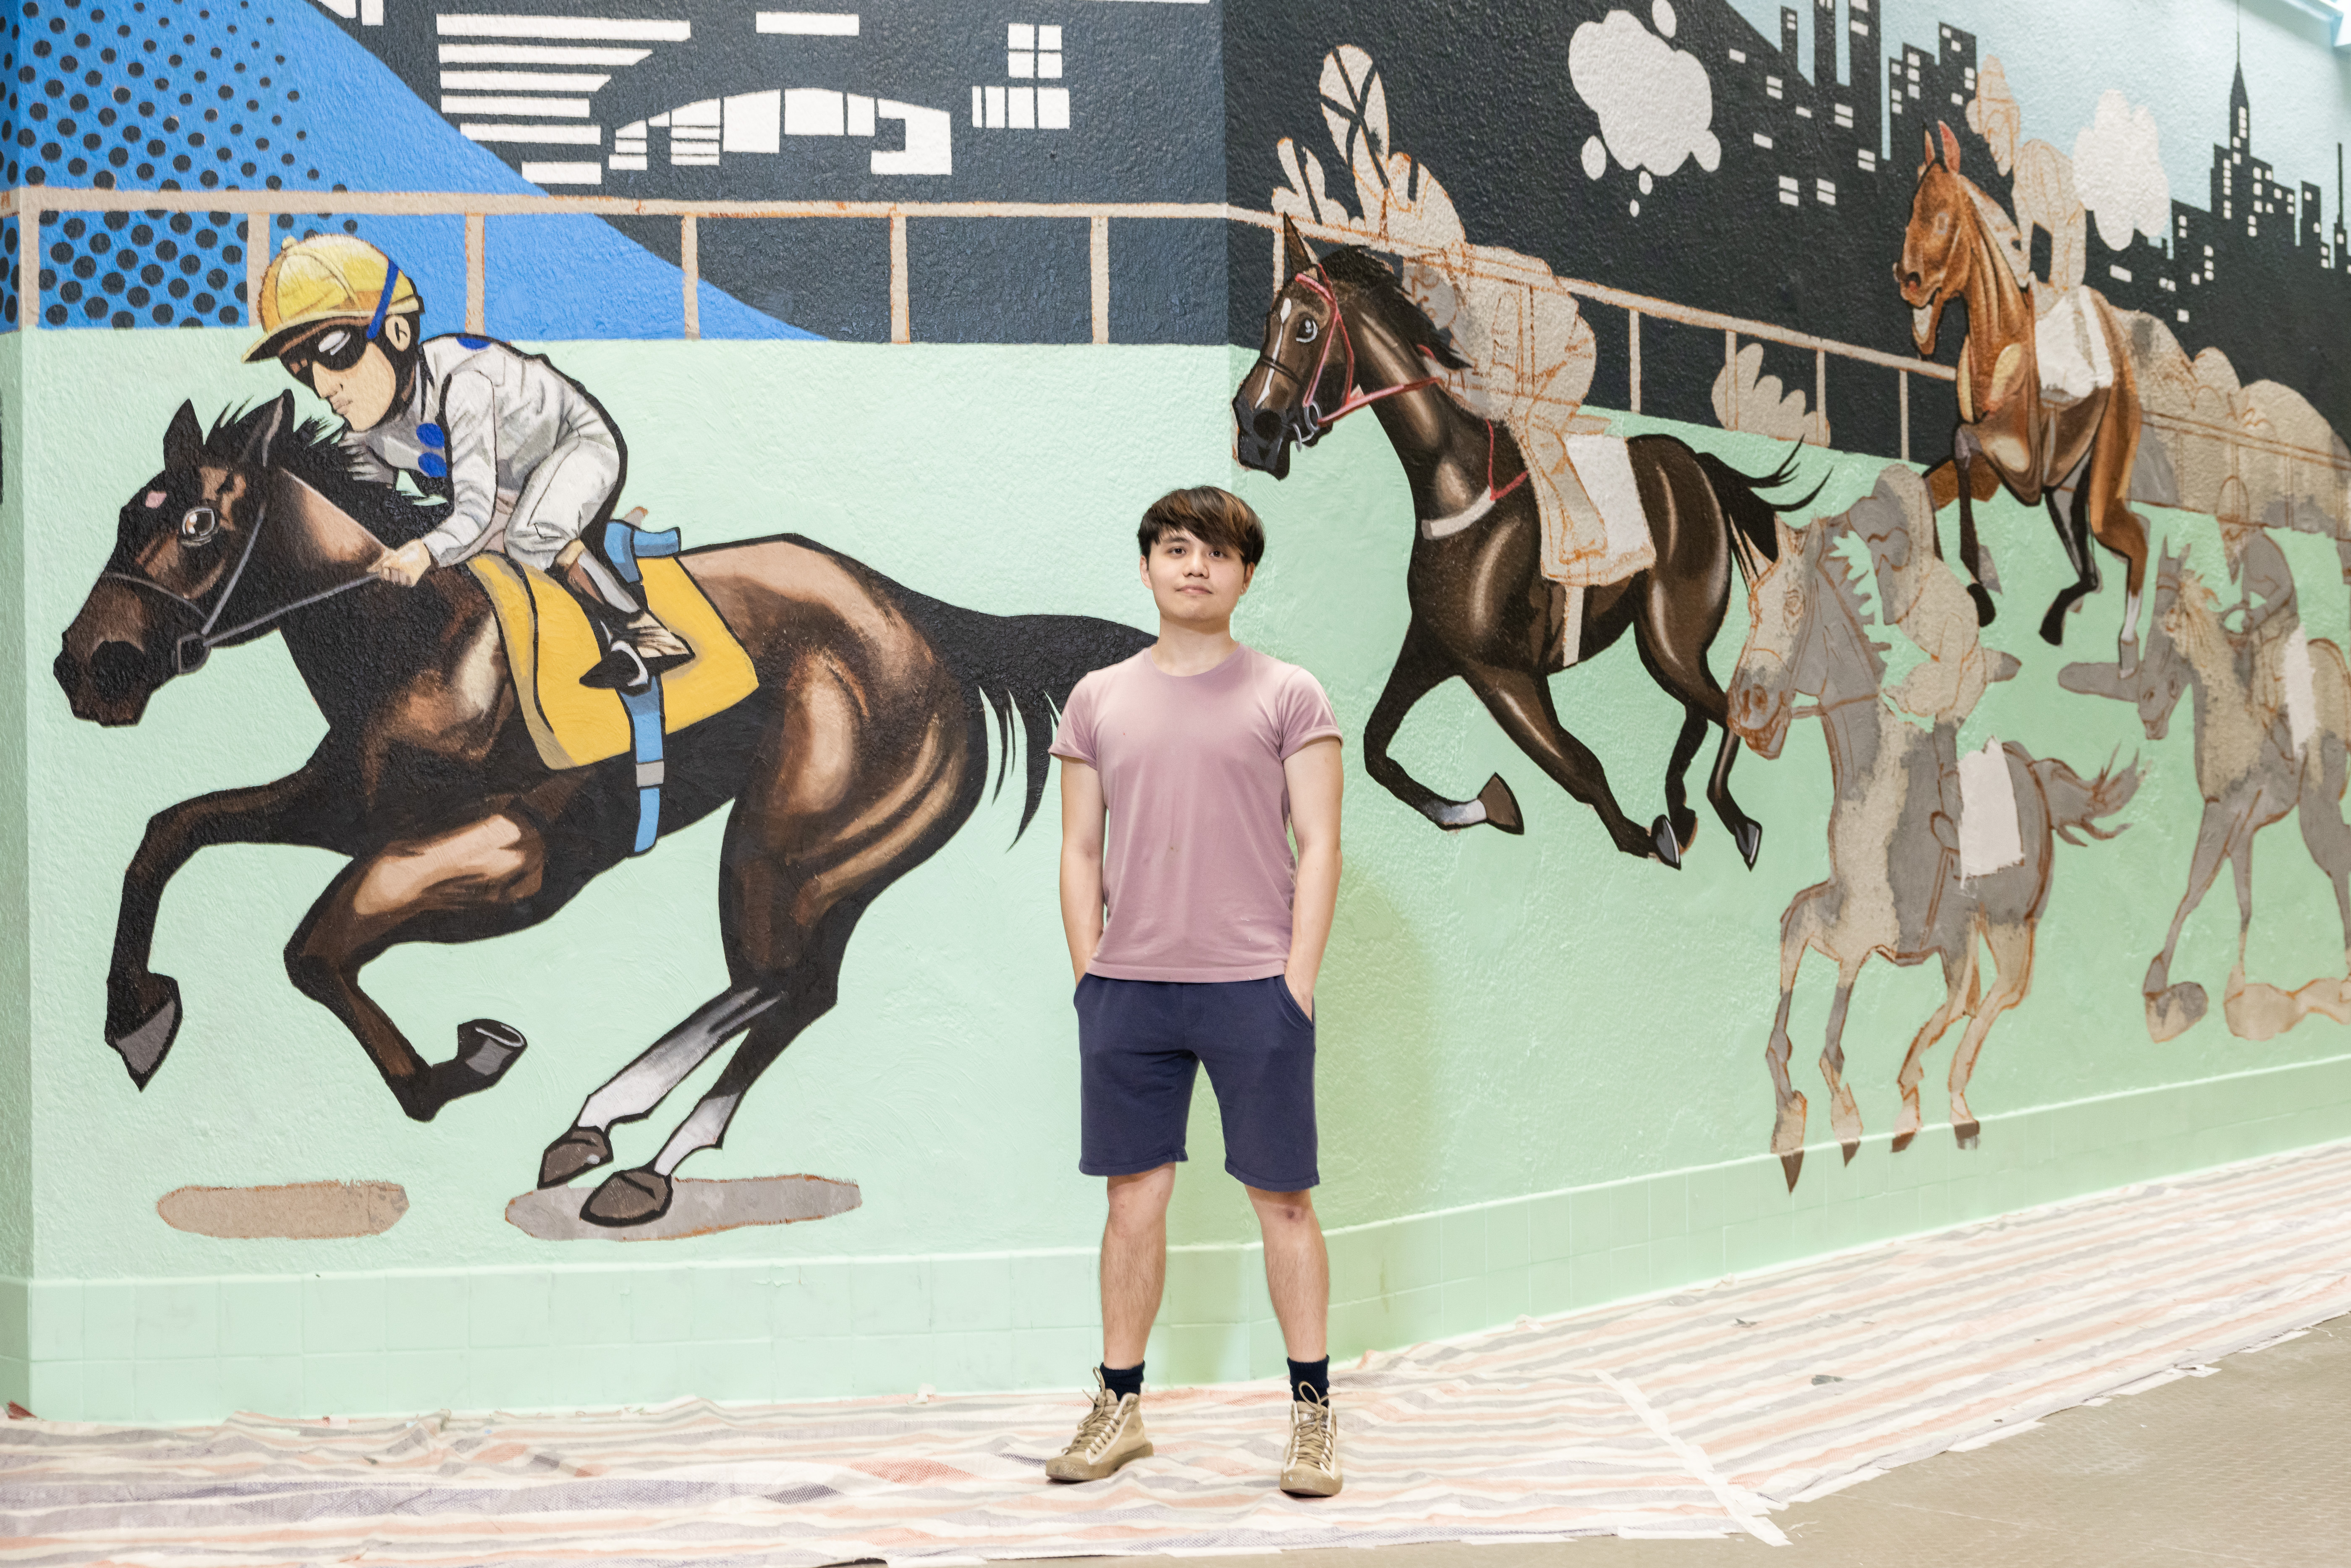 Post-90s Hong Kong artist Jacky Tao and the Artisan Dream team showcase their creativity and artistic skills in a large-scale mural art project at the Sha Tin Racecourse.